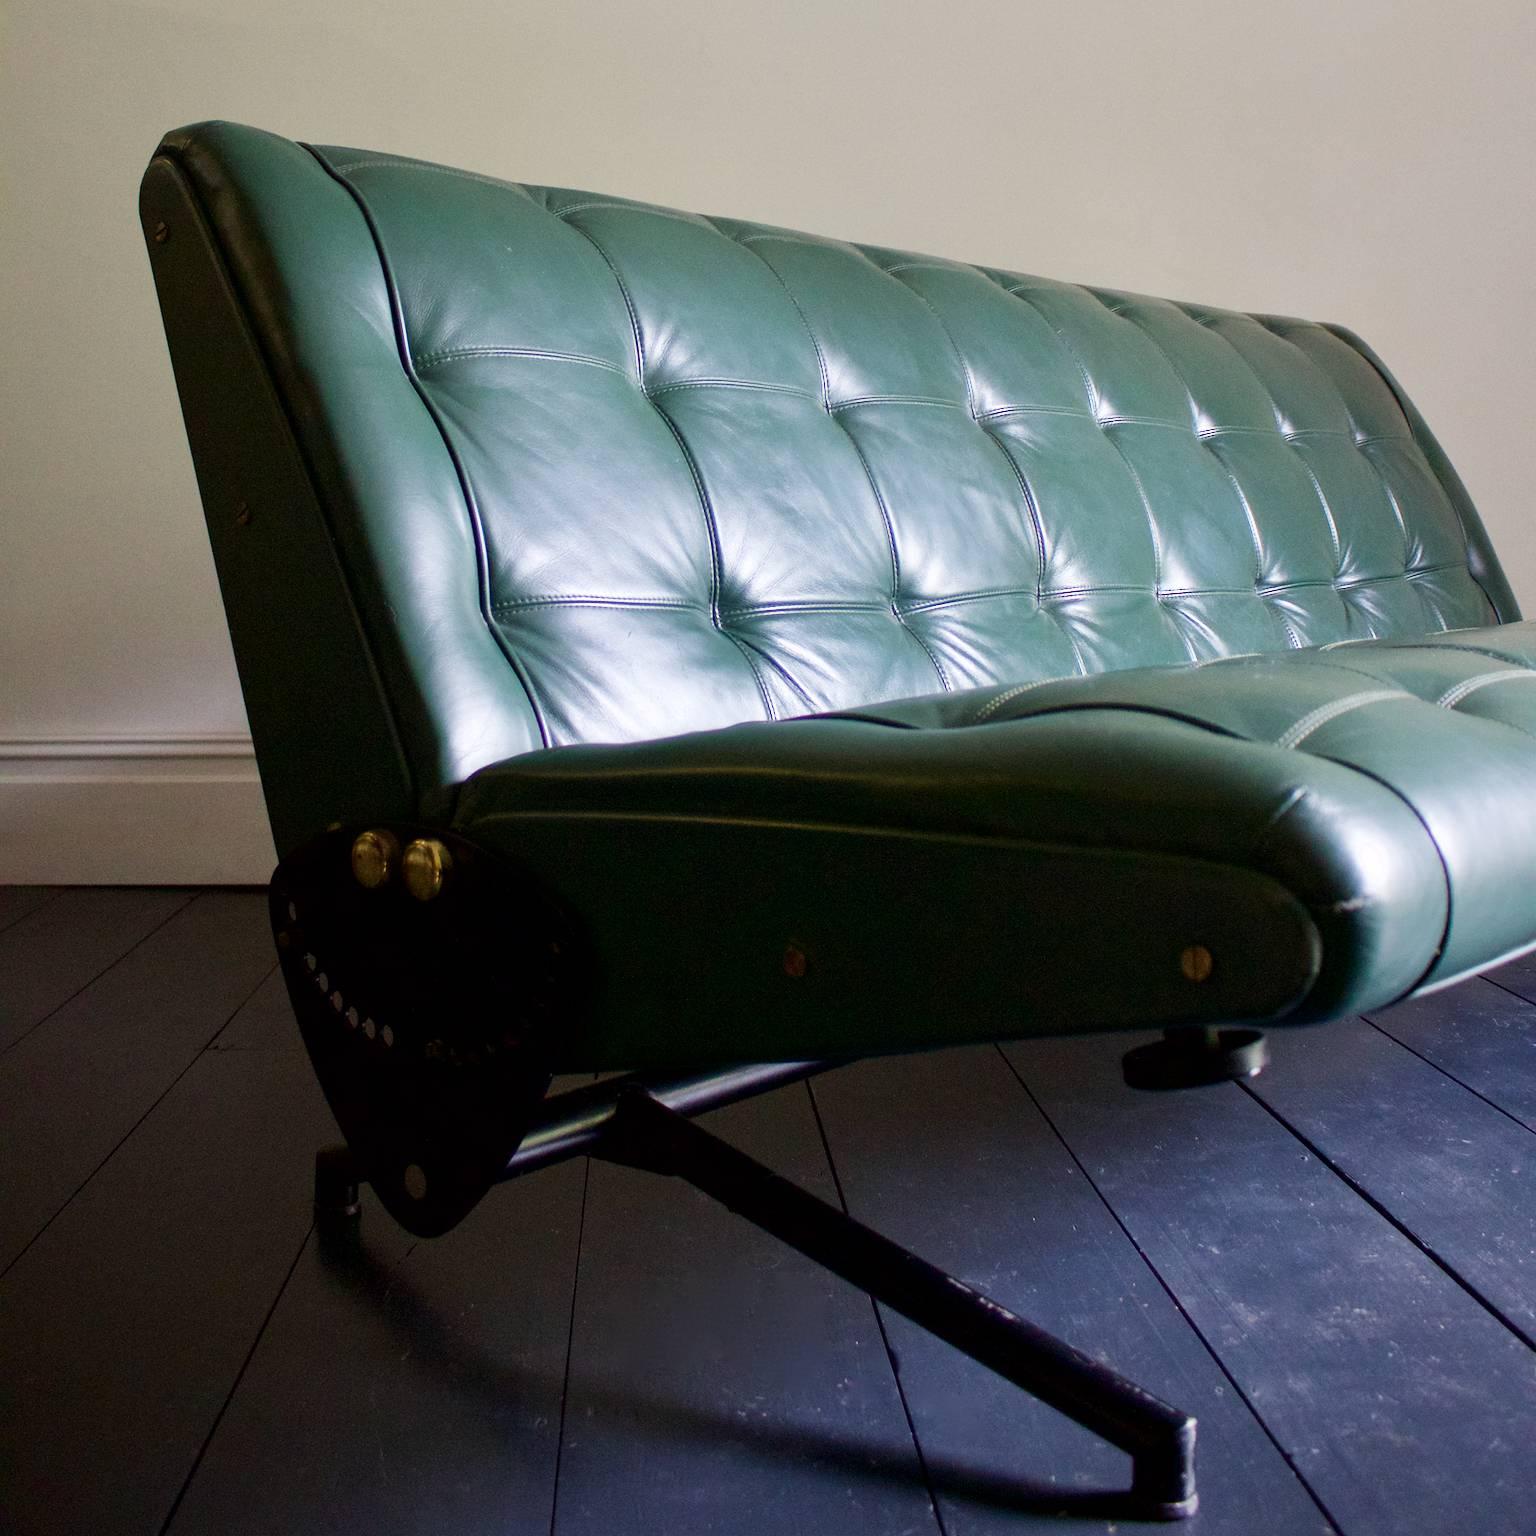 A very nice example of the D70 folding sofa by Osvaldo Borsani for Tecno, Italy.

The design dates from 1954 with this example coming from the late 20th century. The upholstery is a luxurious super soft leather in forest green, with toning